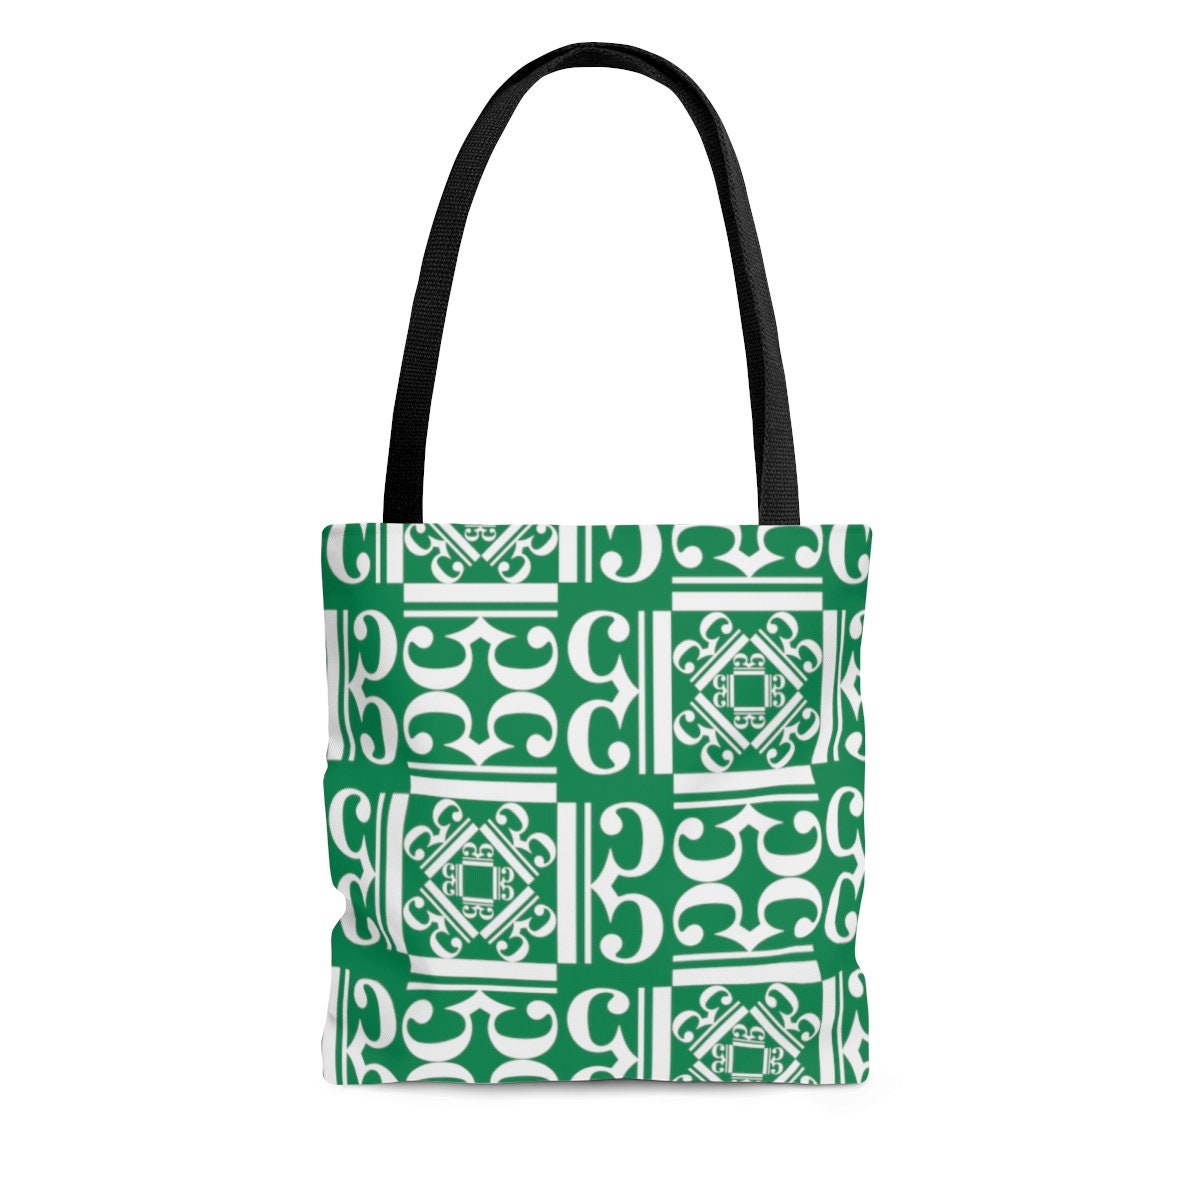 Alto Clef, Tenor Clef, C Clef Tote Bag - Green with white clefs